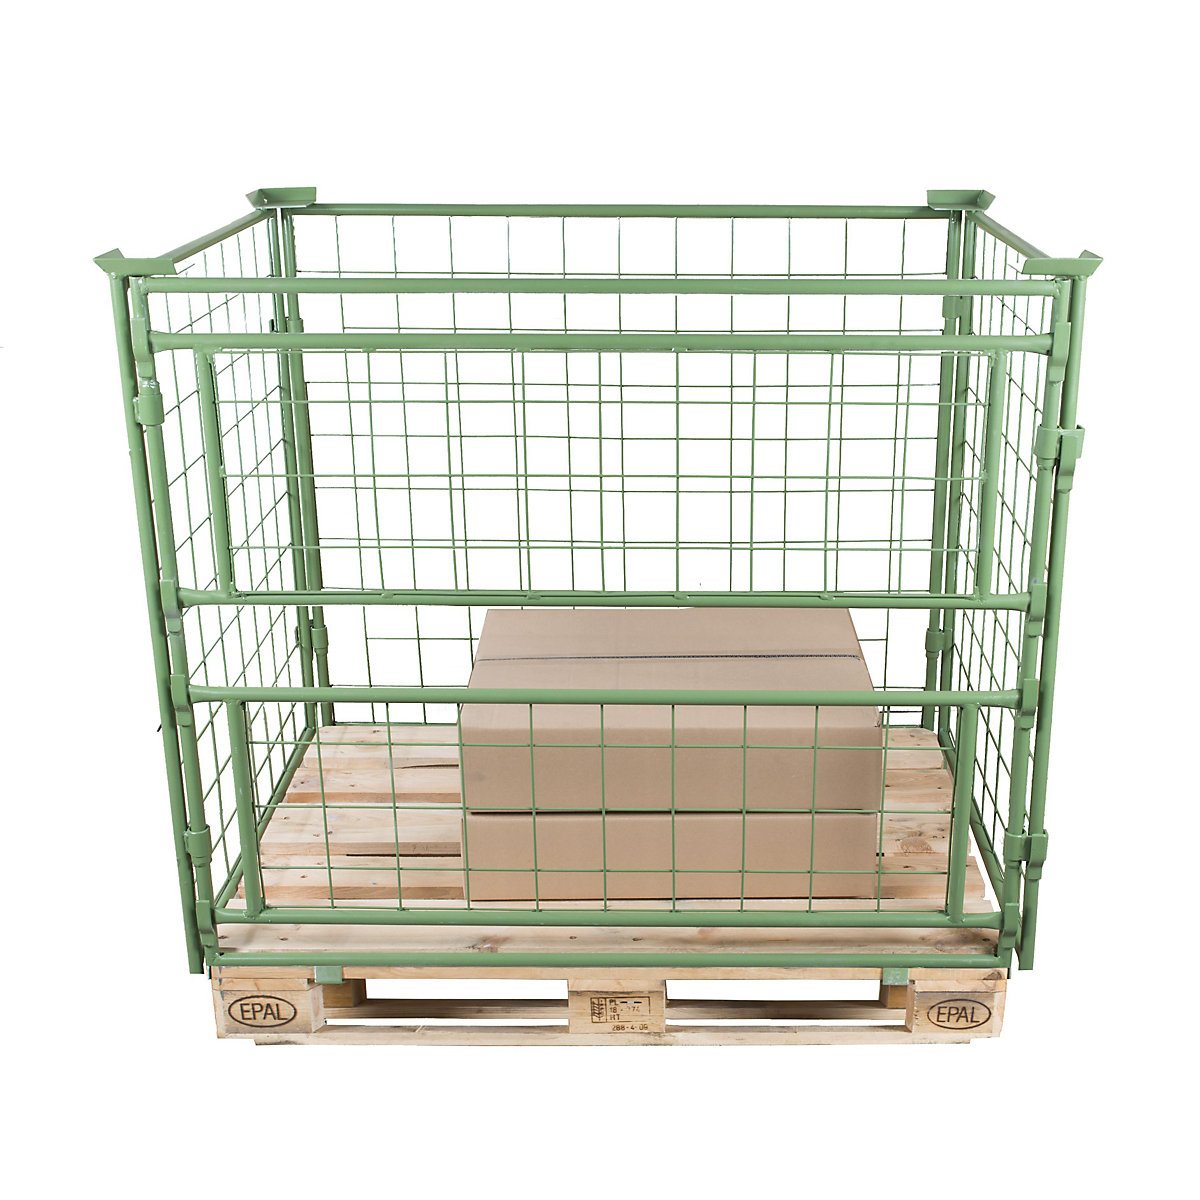 Pallet frame, effective height 800 mm, for stacking, WxL 800 x 1200 mm, 1 long side with 2 parts, removable